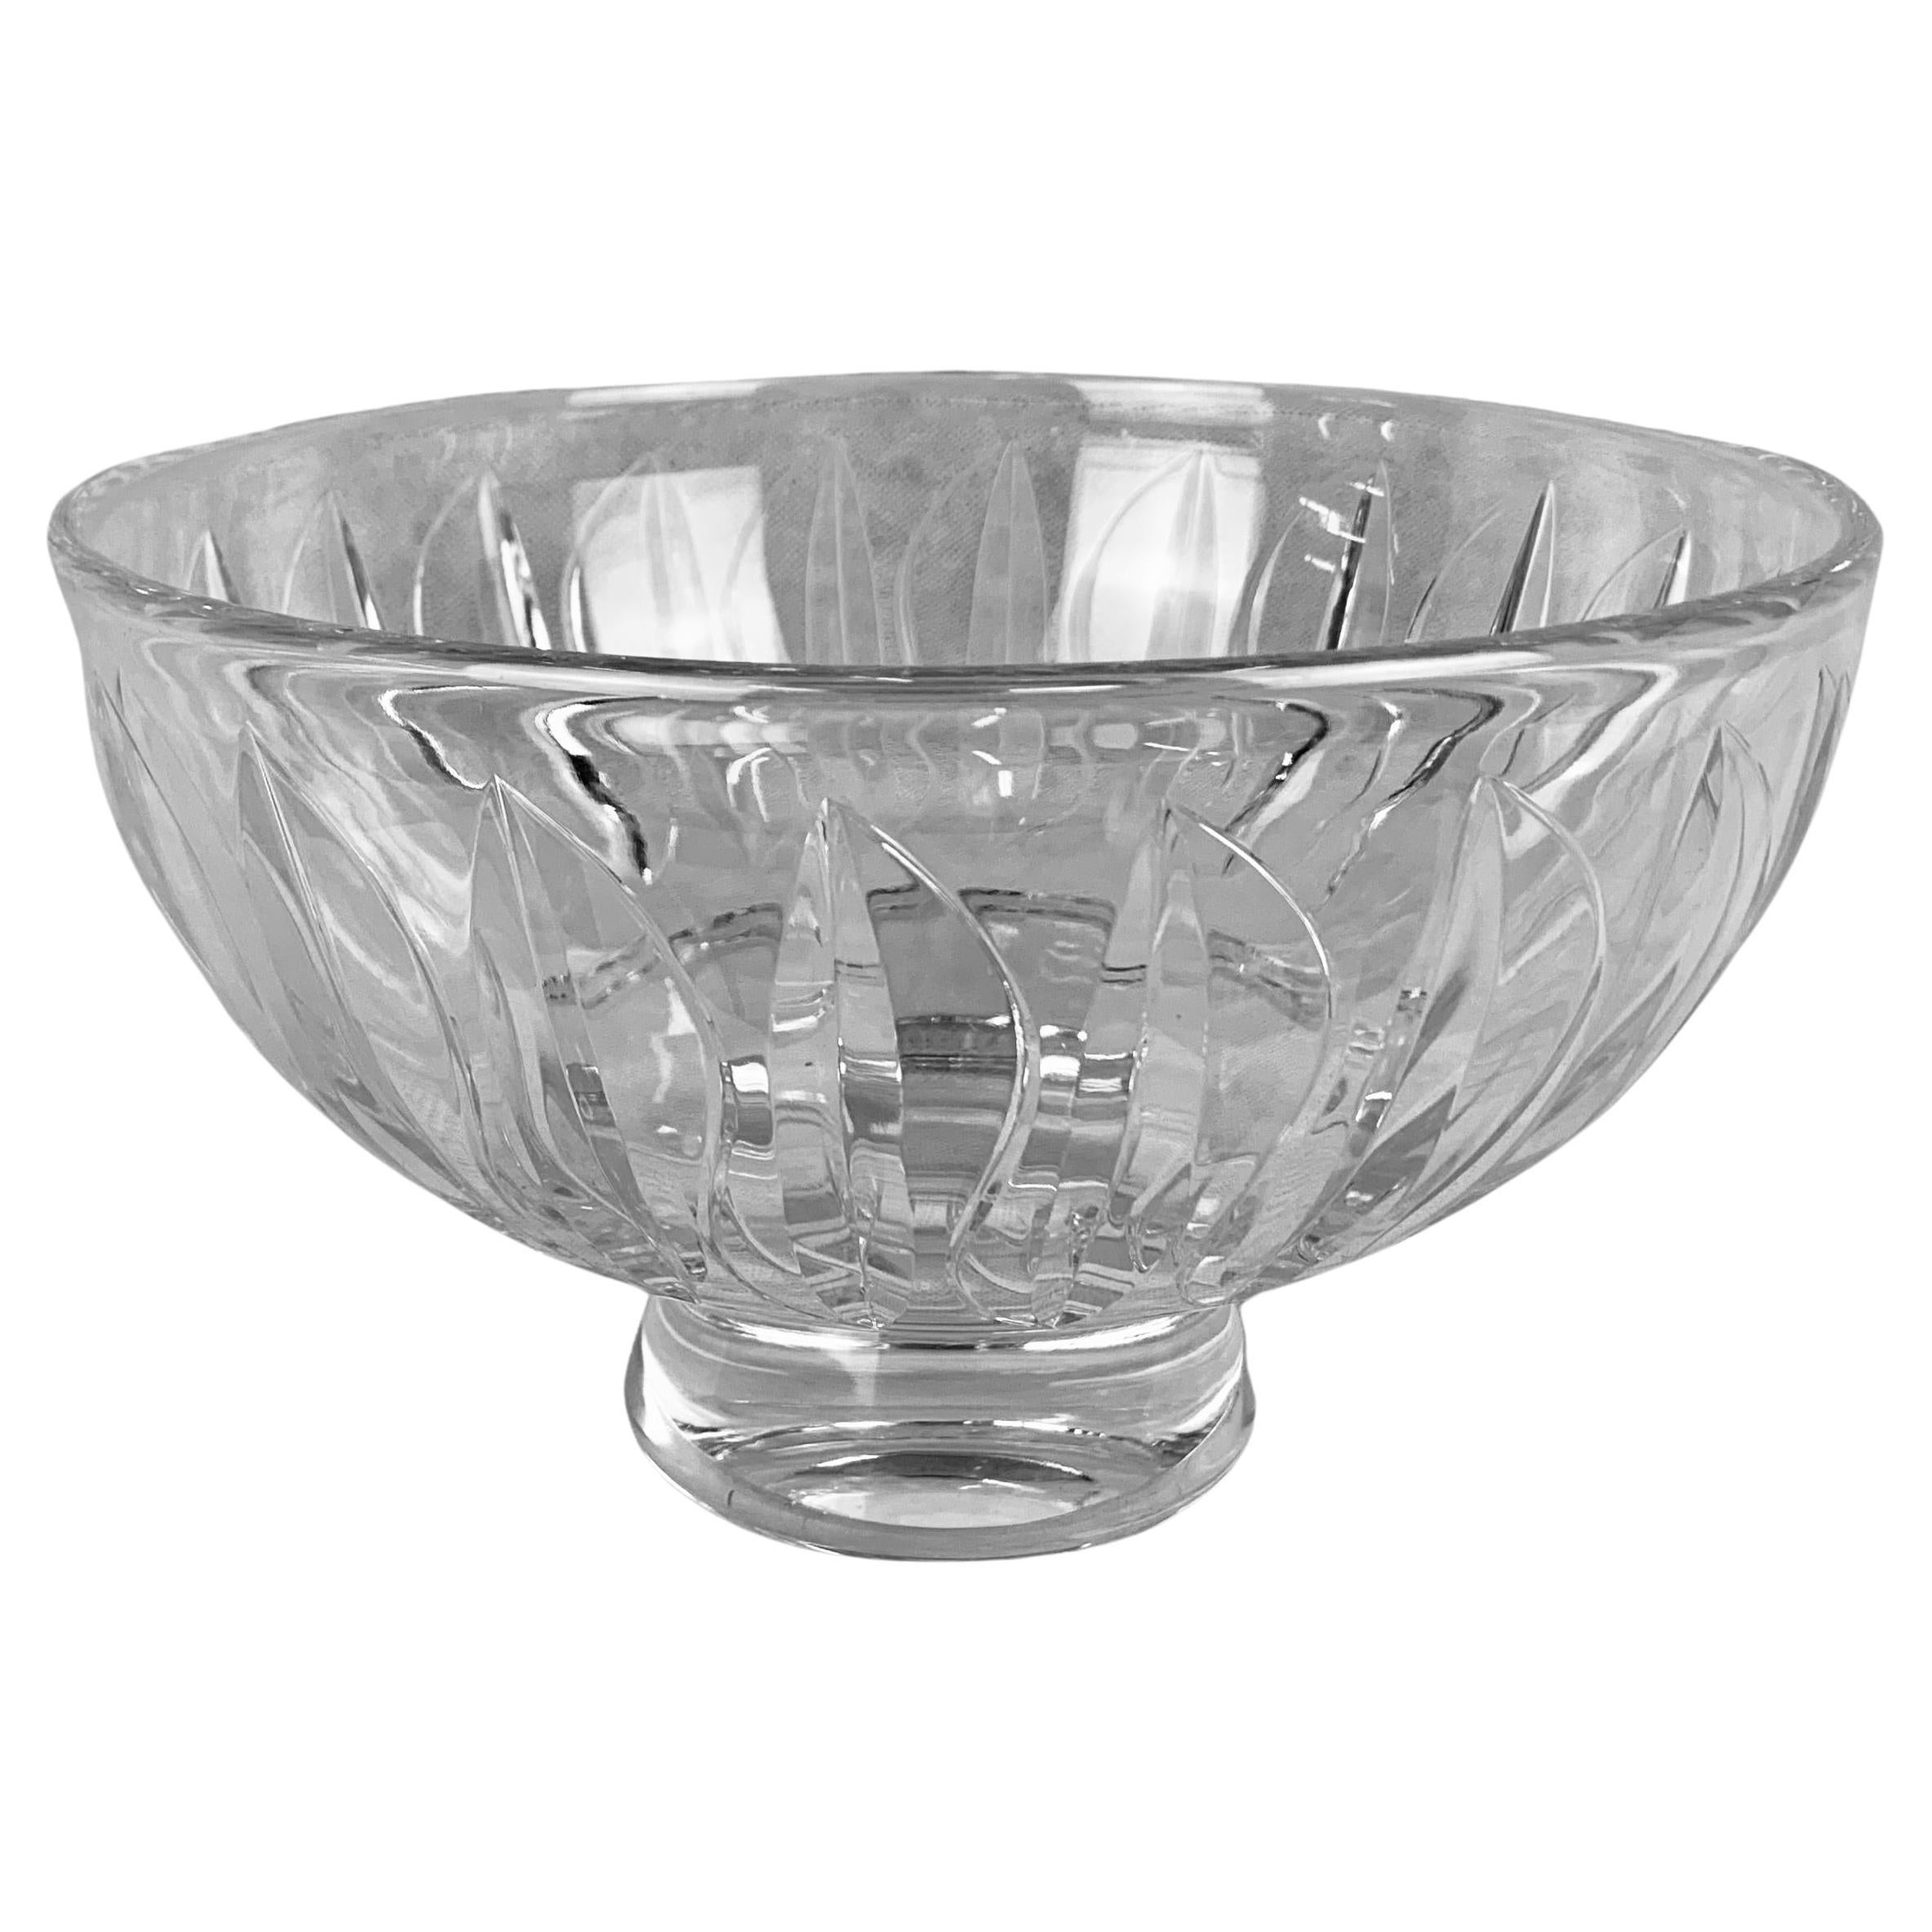 Stuart Clear Cut Crystal Bowl in the Hampshire Pattern-England